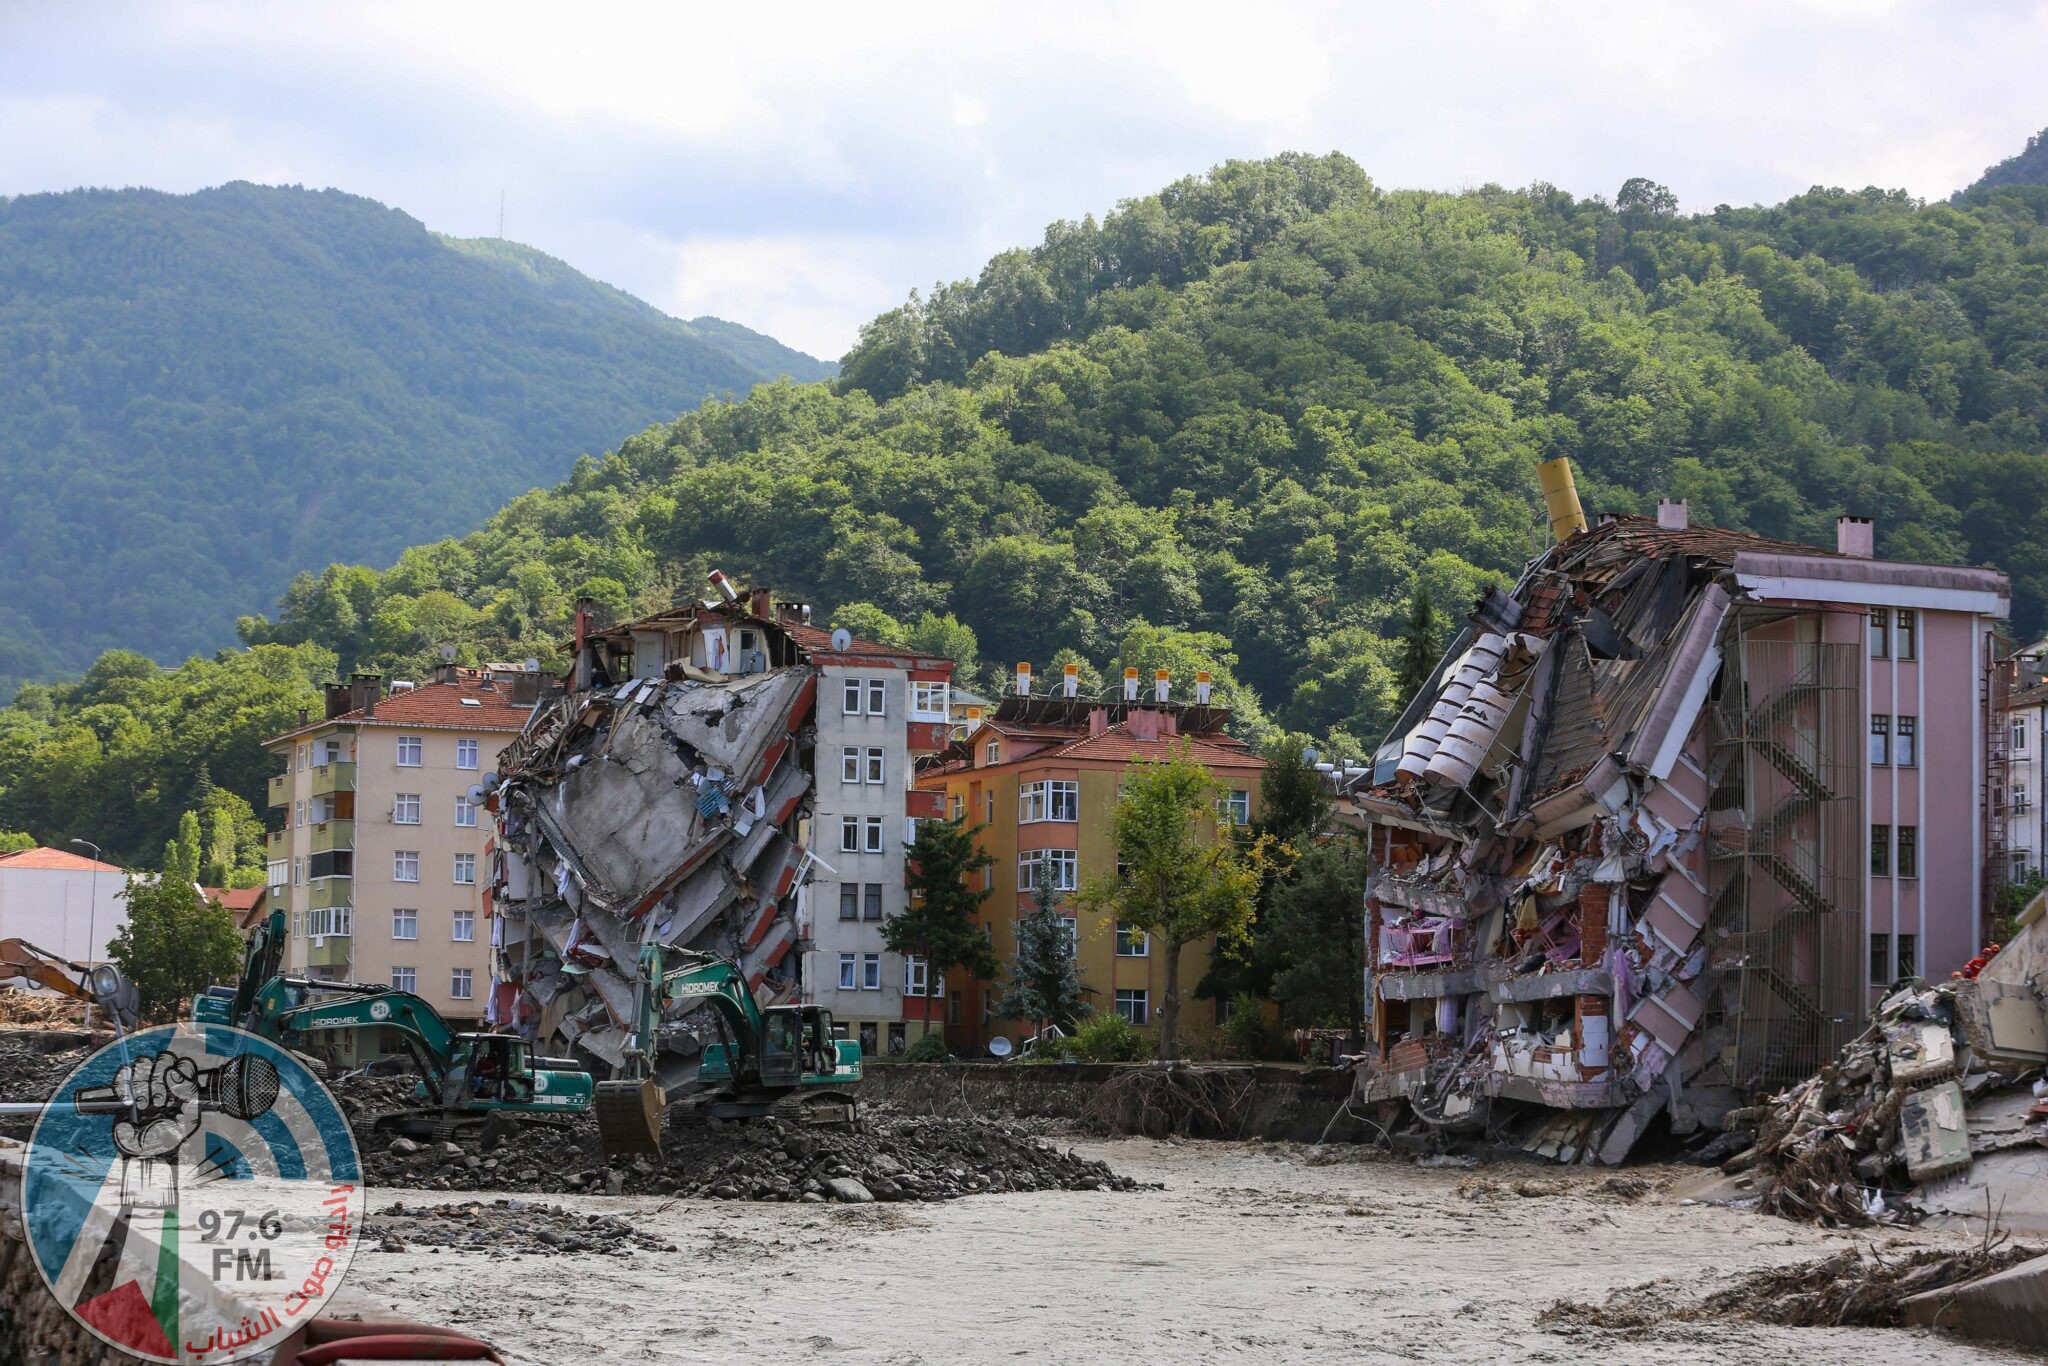 The front of two buildings are collapsed after the Ezine river broke it's banks during flash floods in Bozkurt in the district of Kastamonu, in the Black Sea region of Turkey on August 14, 2021. Turkey battled disaster on two fronts on August 14, 2021, with eight people dying when a fire-fighting aircraft crashed and rescuers racing to find survivors of flash floods in the north that have killed at least 55. (Photo by AFP)